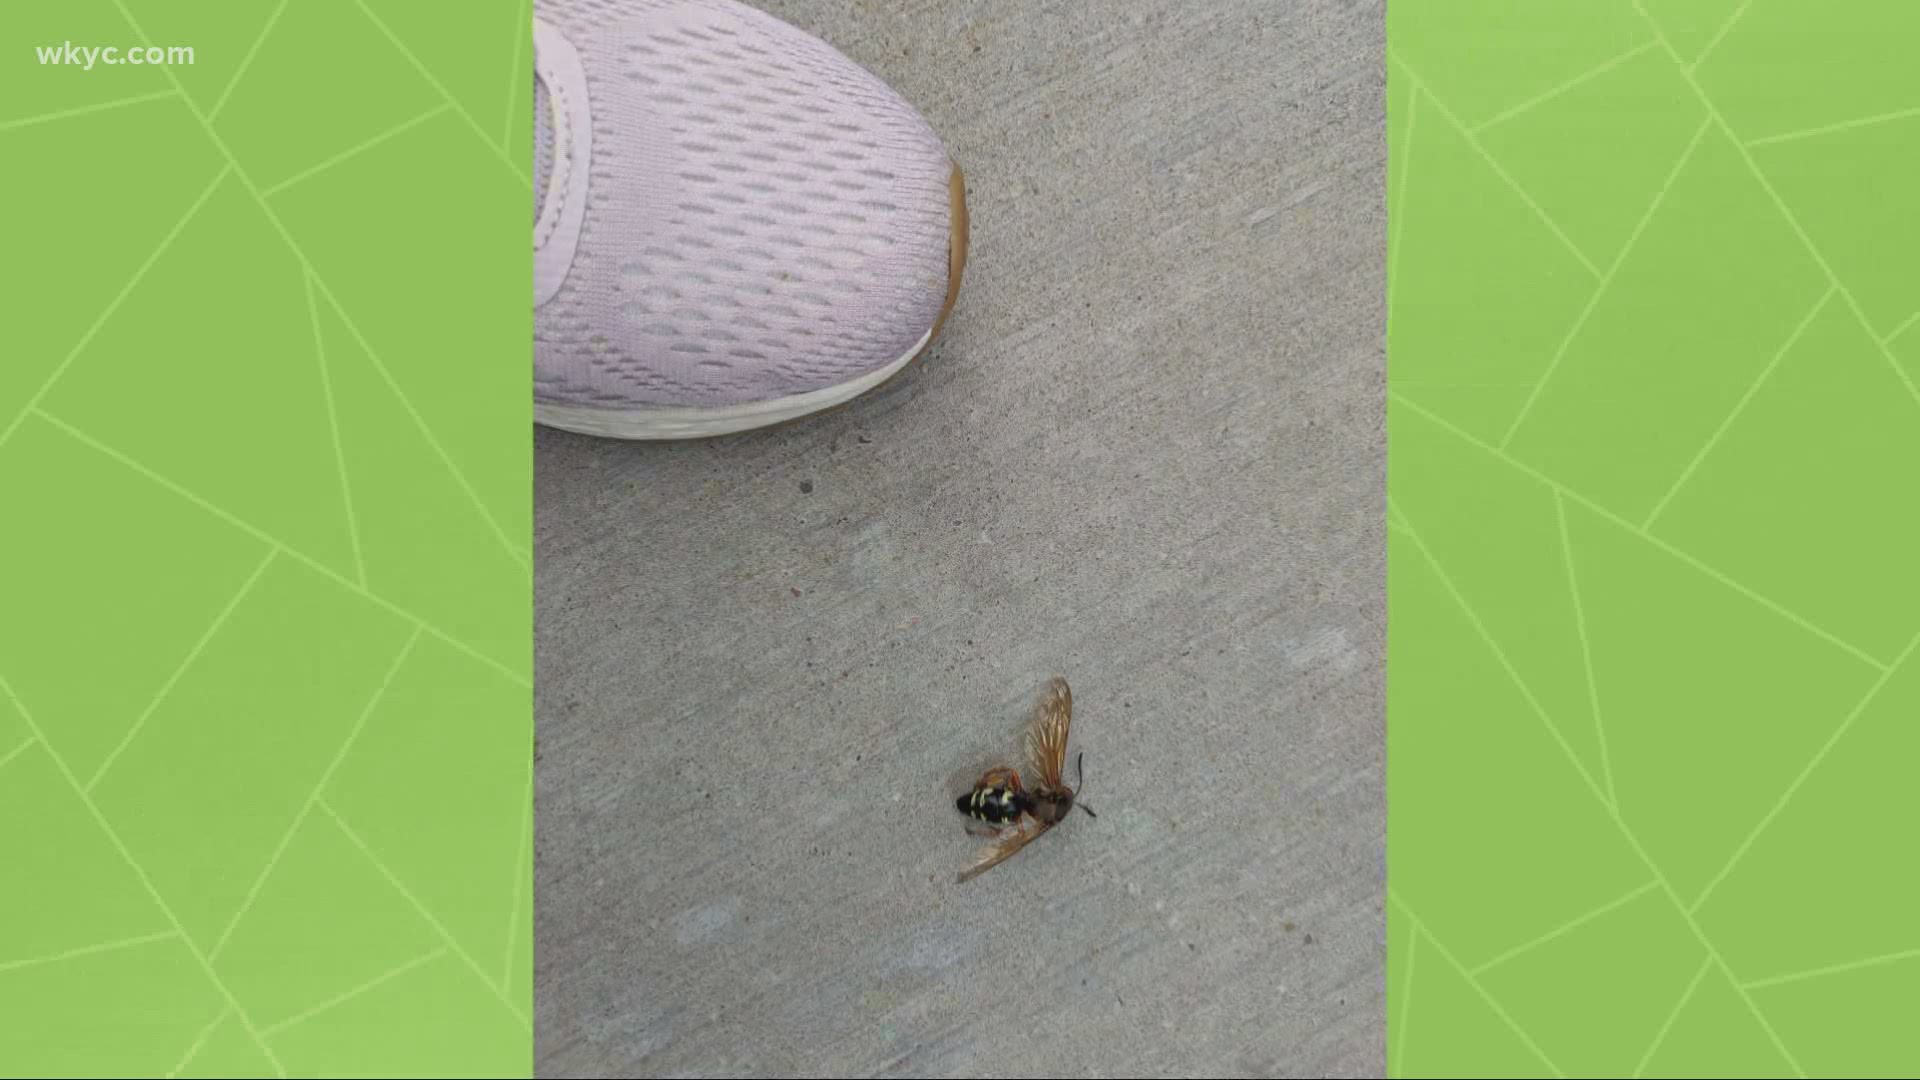 Our Chief was taking a walk and stumbled upon a big bee. She asked an expert to explain the creature.